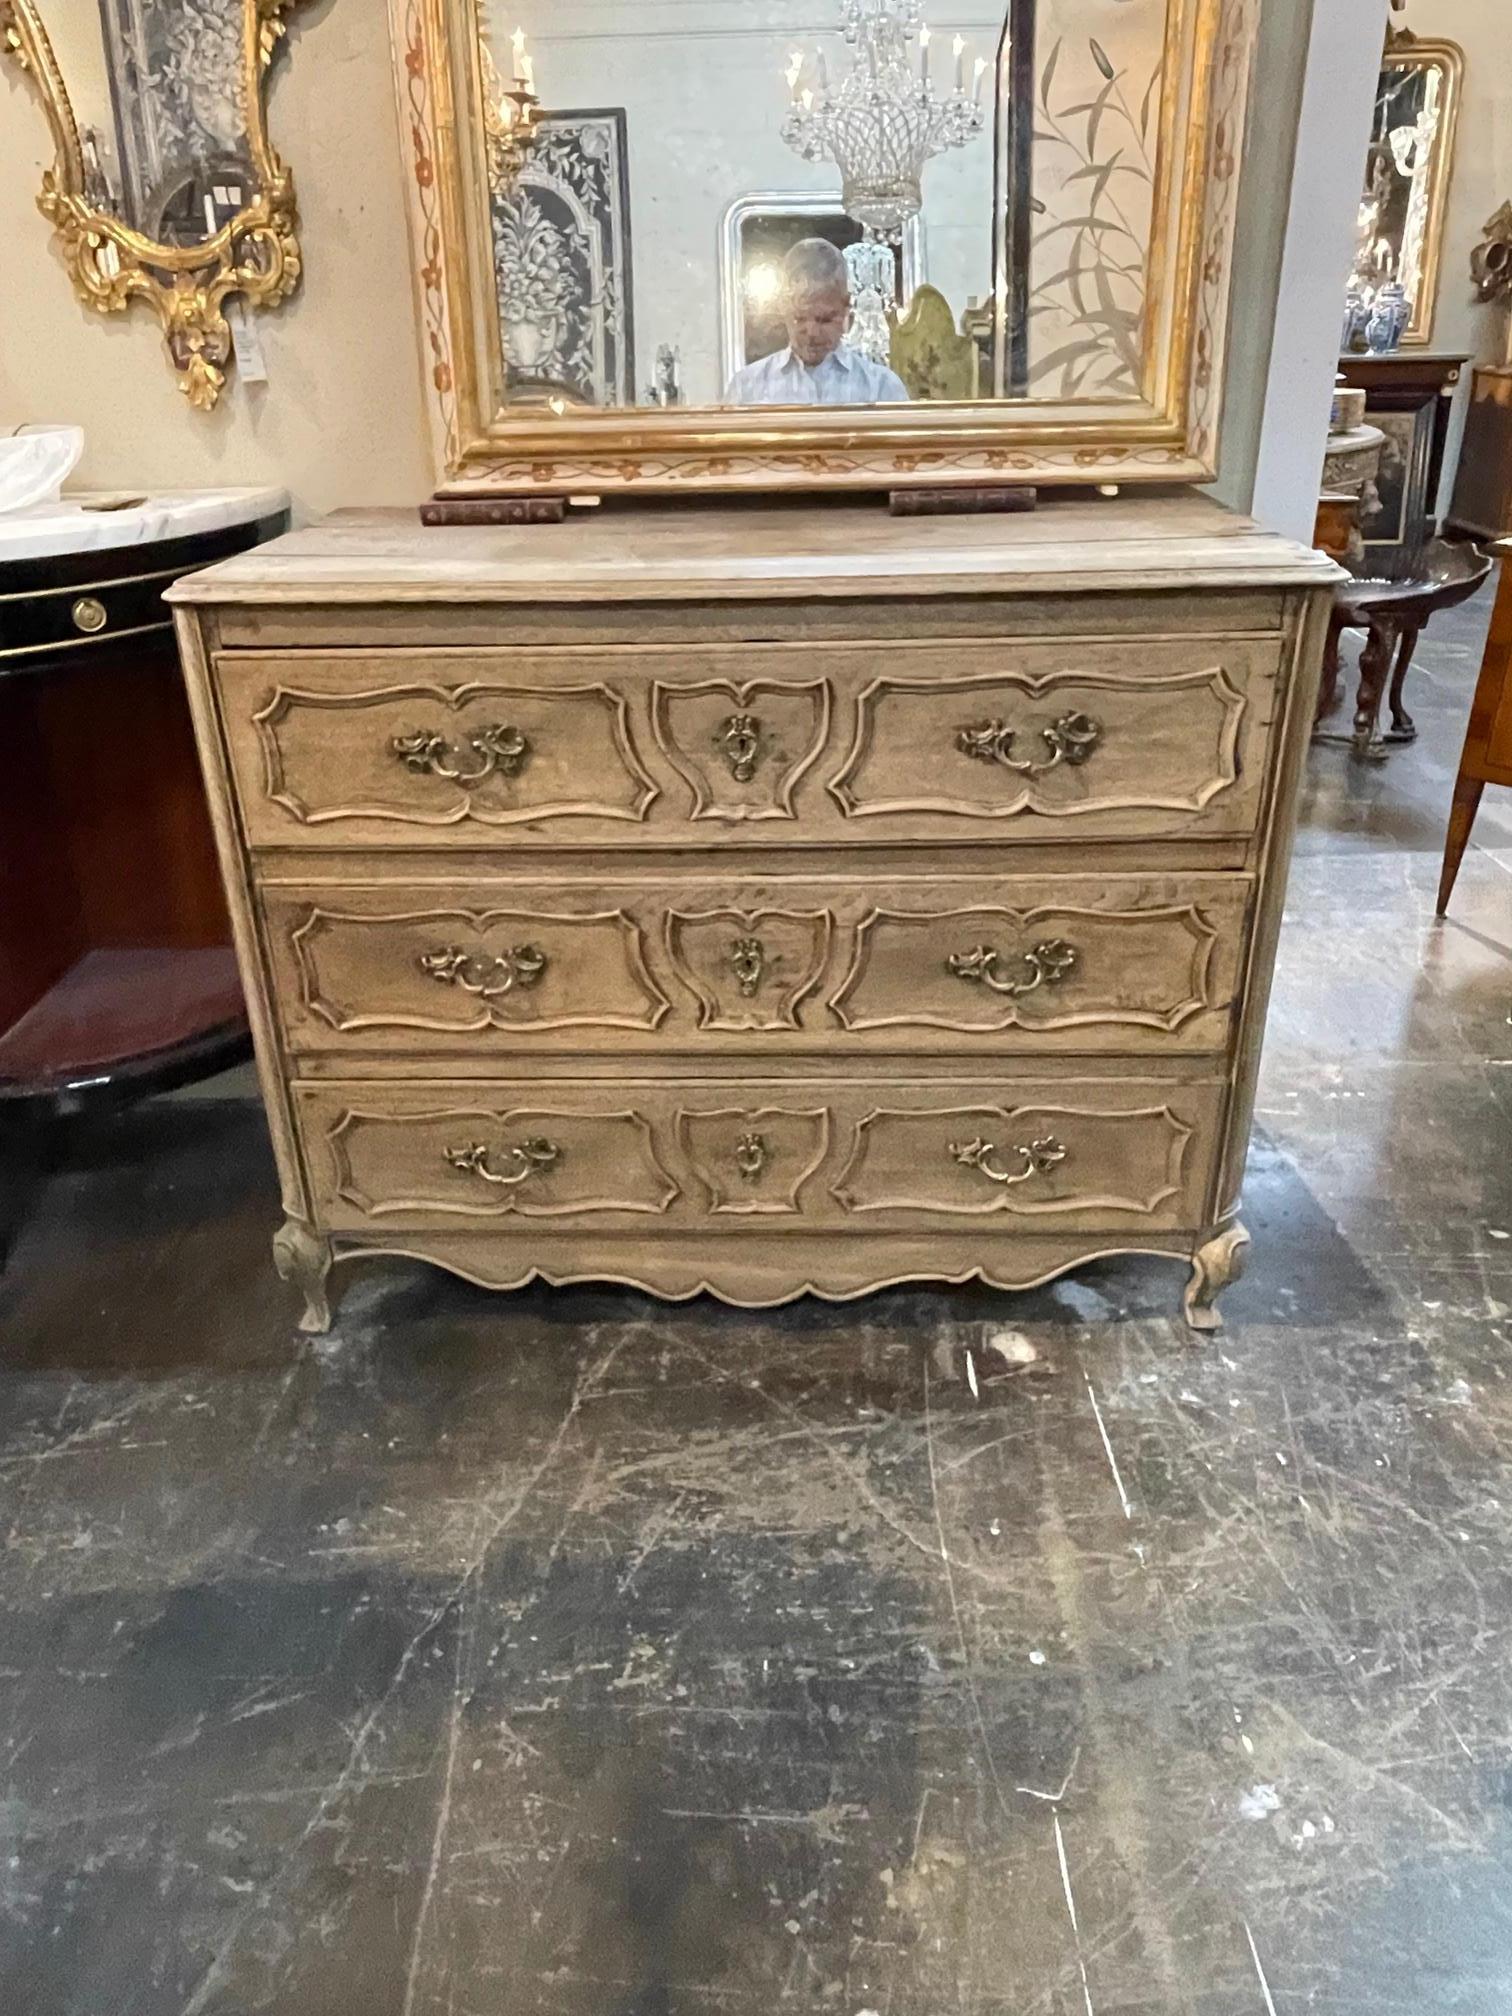 18th century French carved and bleached oak commode. Circa 1780. Adds warmth and charm to any room!